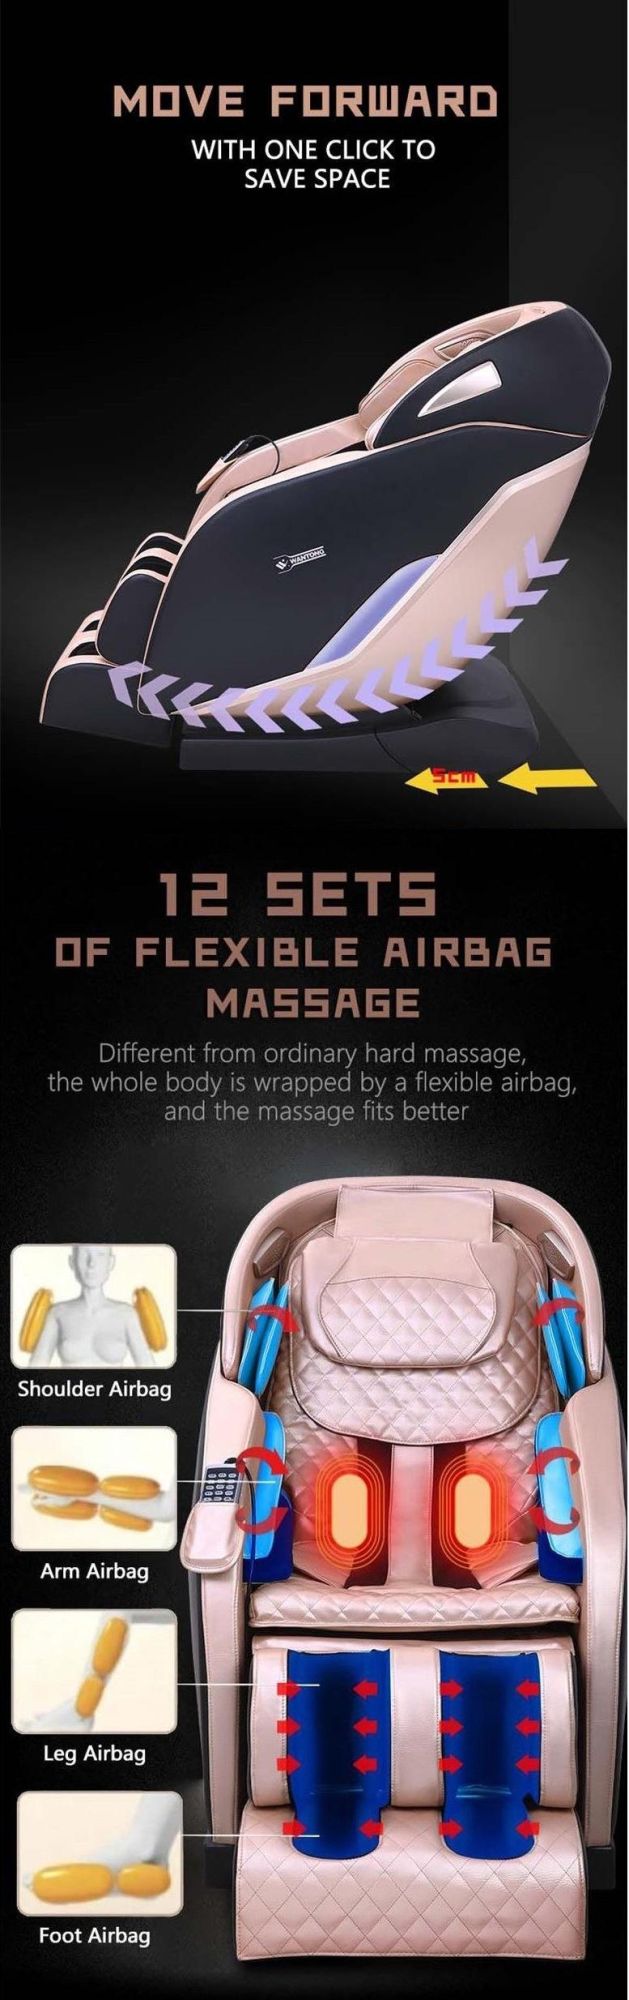 Hot Selling Full Body High Quality ABS Body Massage Chair Cheap Price